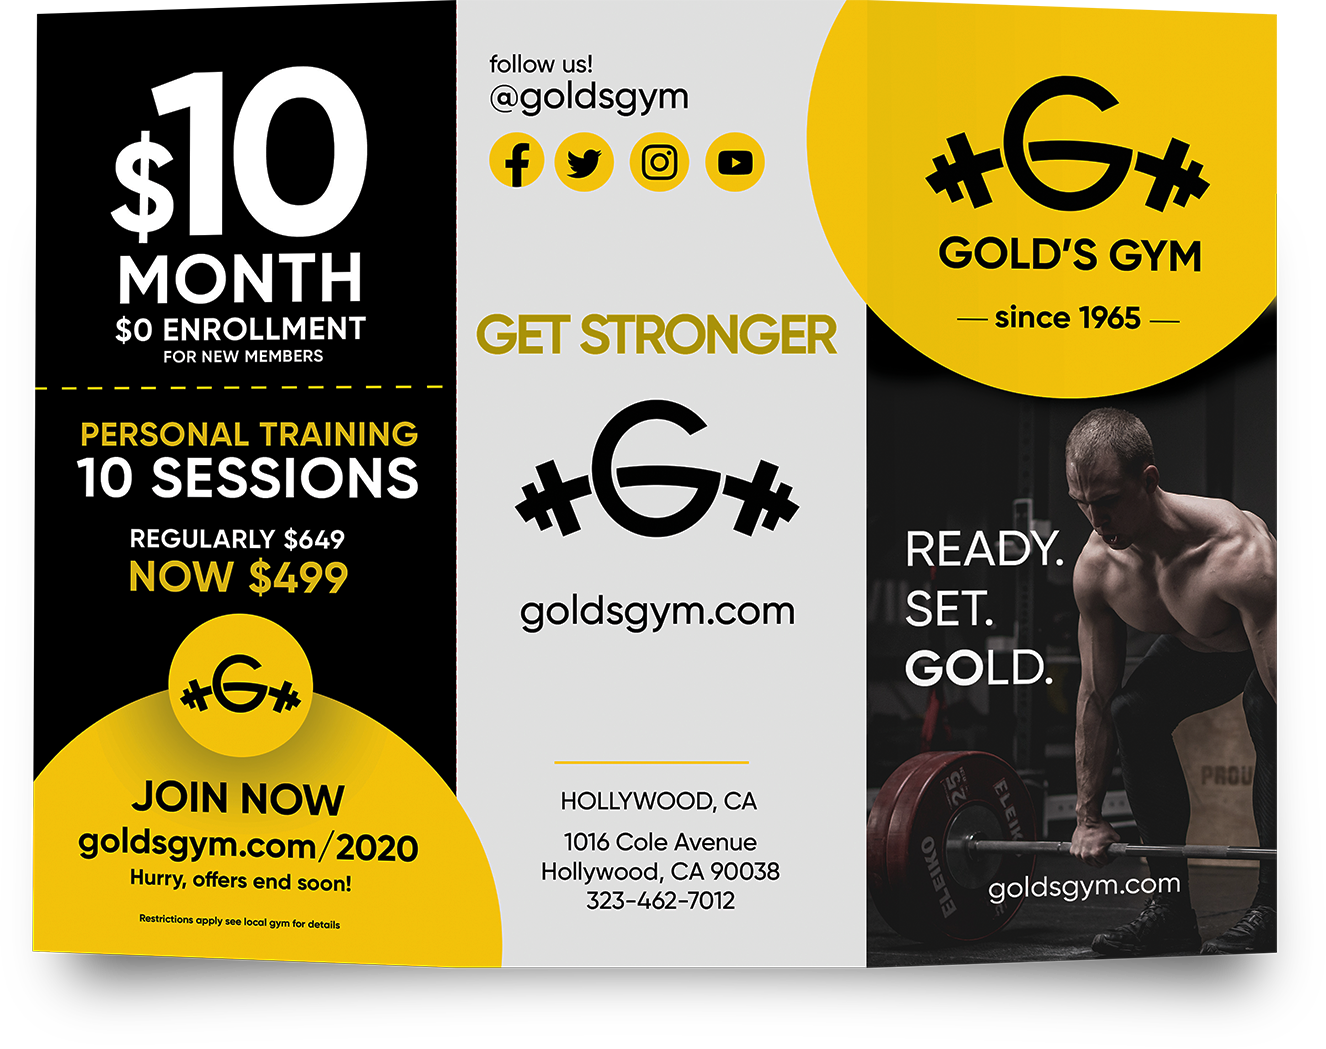 gold's gym business plan